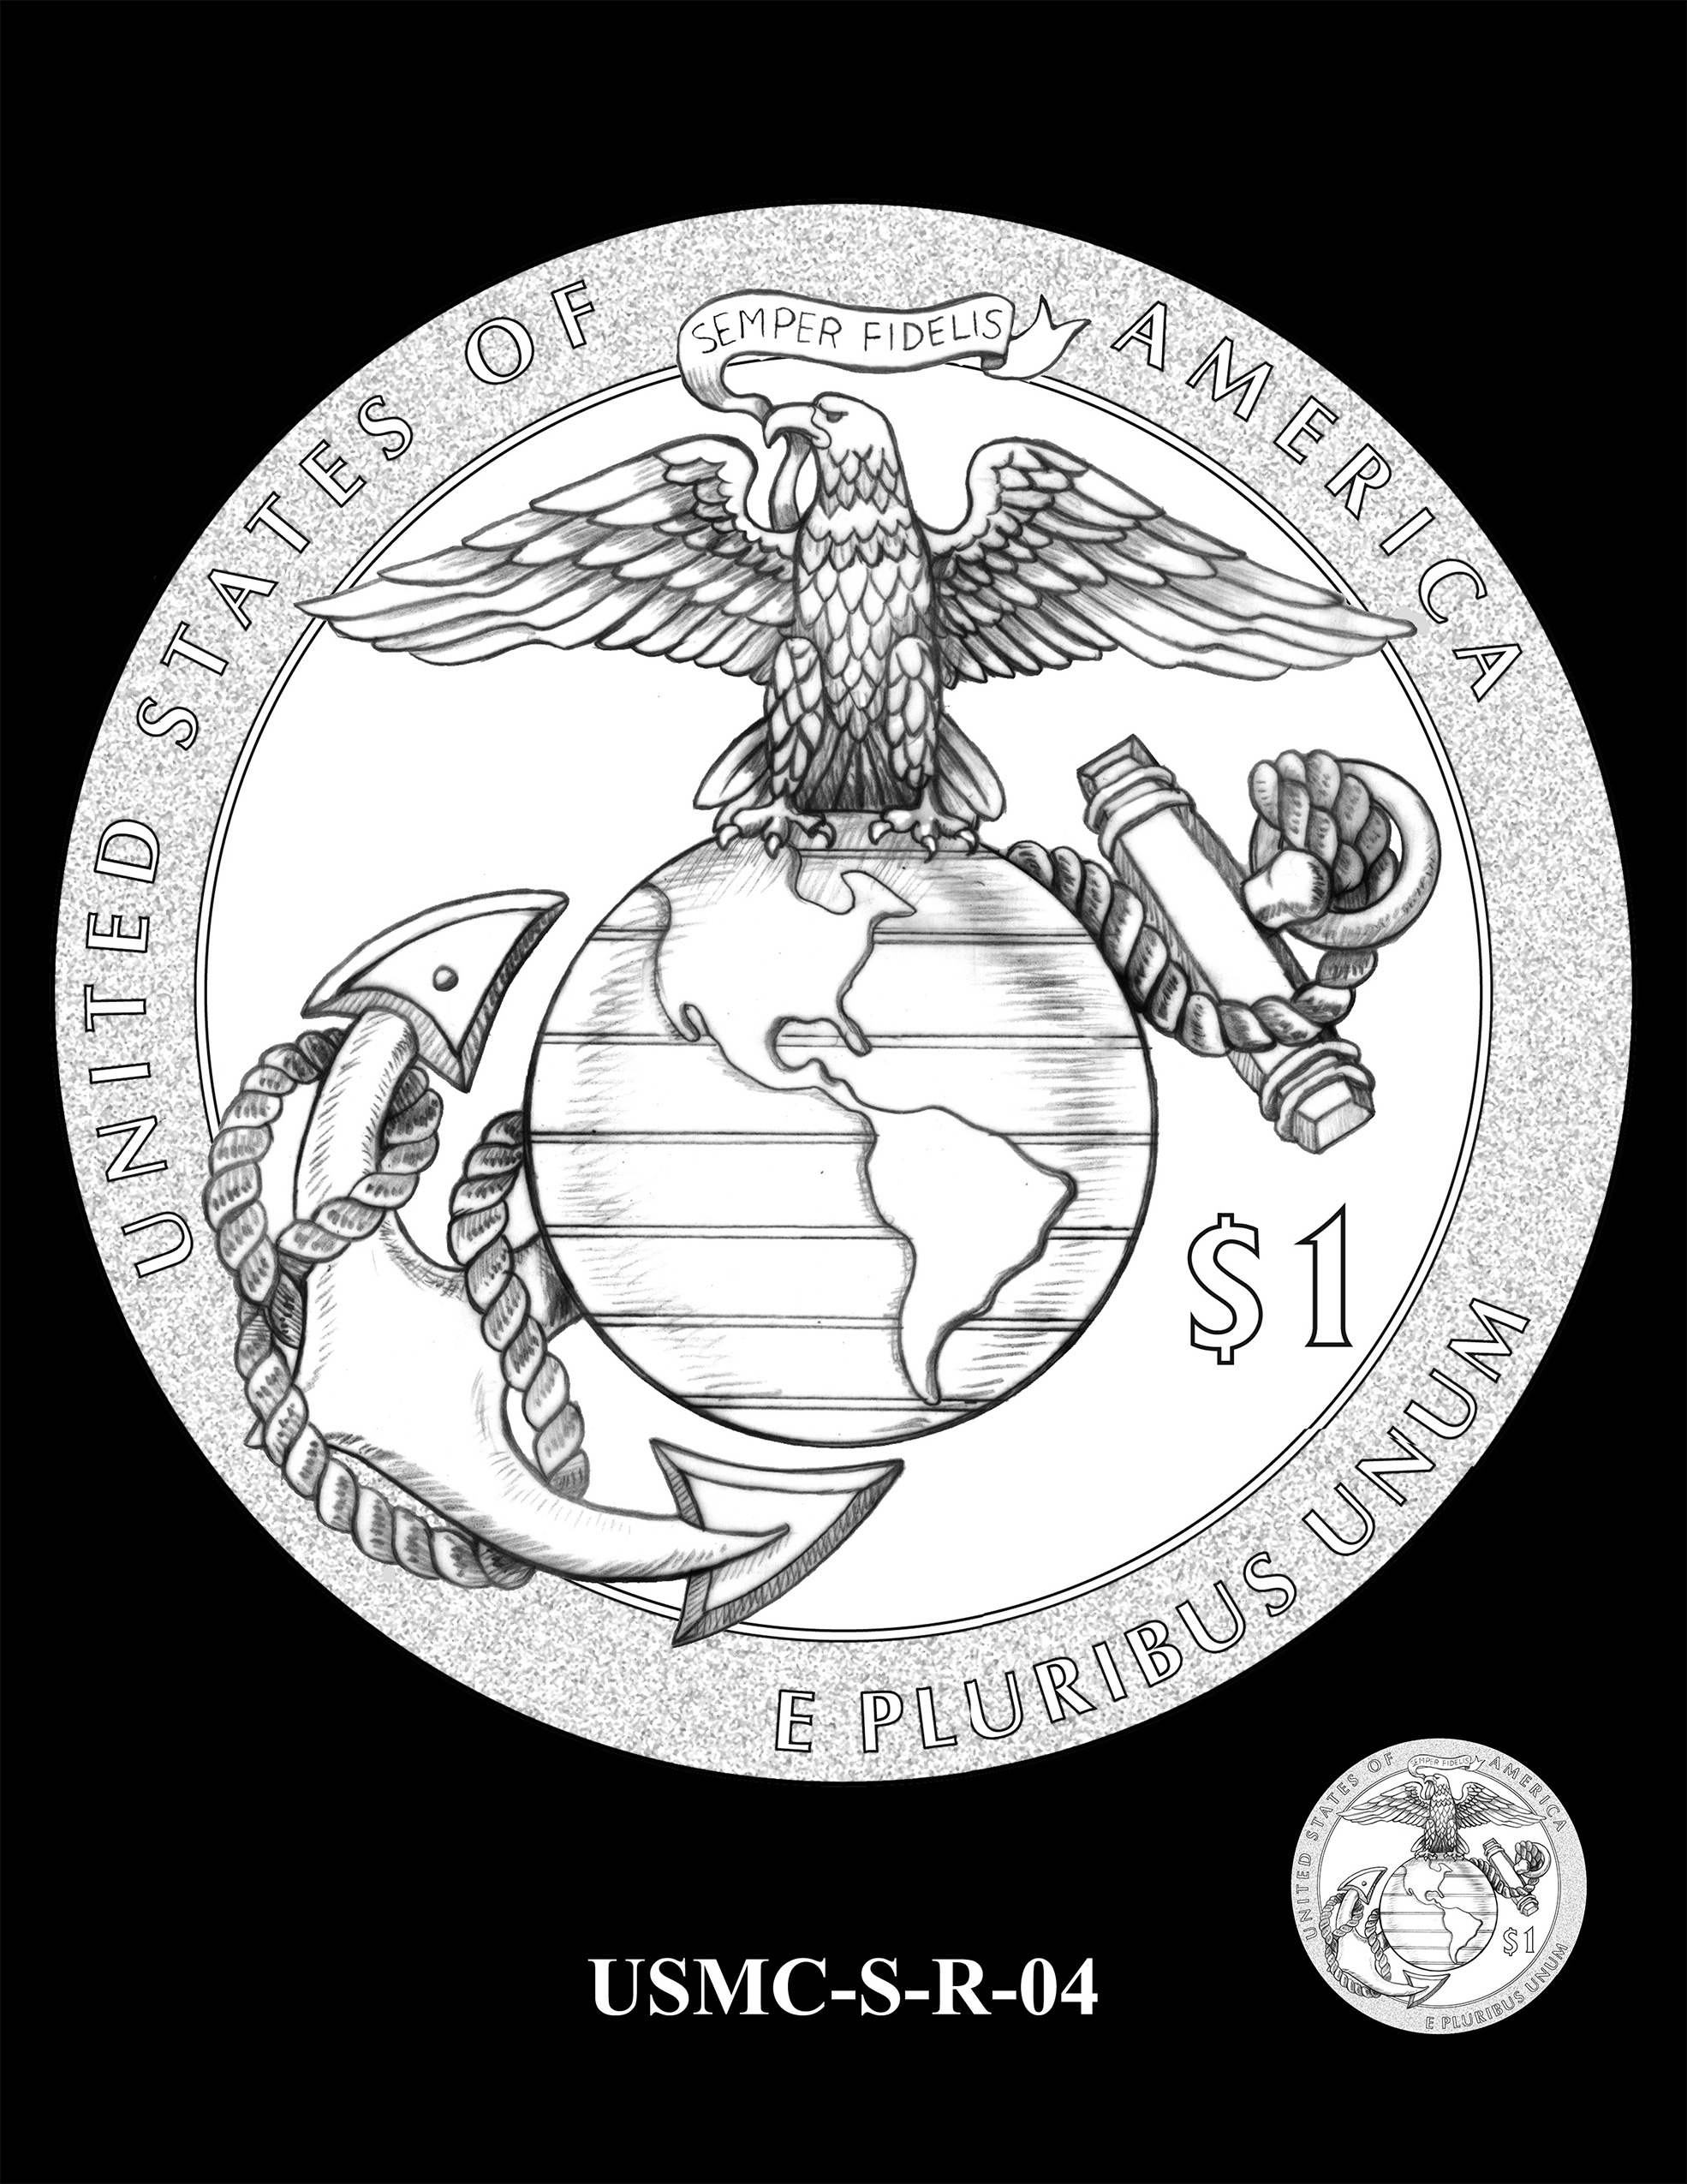 USMC-S-R-04 -- 250th Anniversary of the United States Marine Corps - Silver